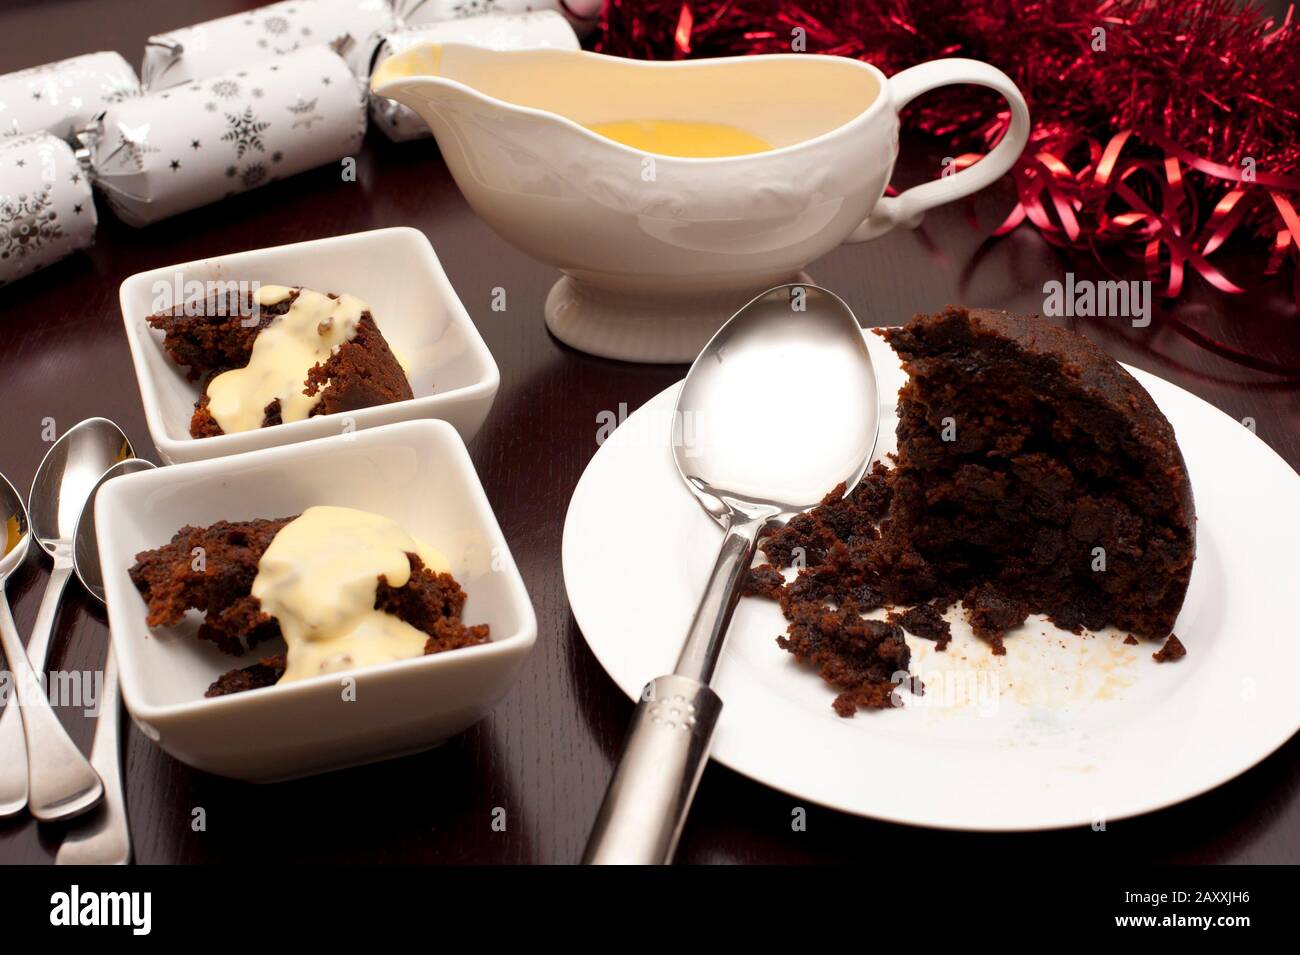 Delicious fruity Christmas pudding with brandy cream sauce served in dishes  on a decorative Christmas table for a seasonal Xmas celebration Stock Photo  - Alamy